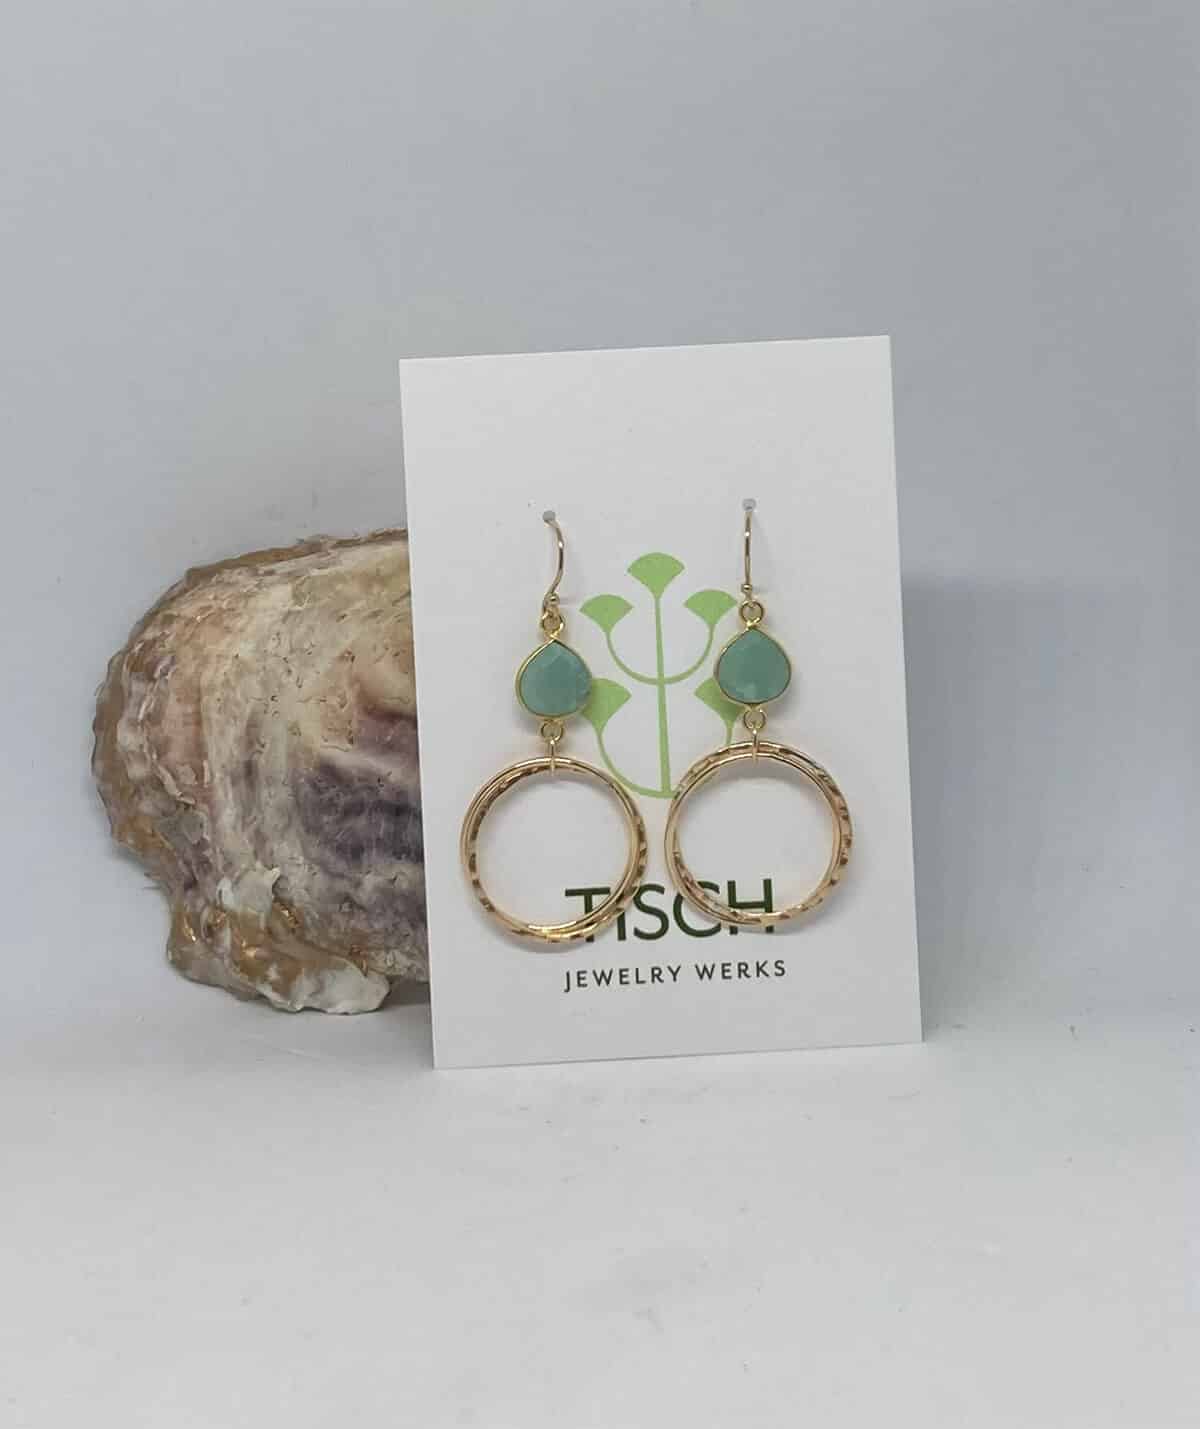 Earrings with a blue stone and gold hoops on a white card.